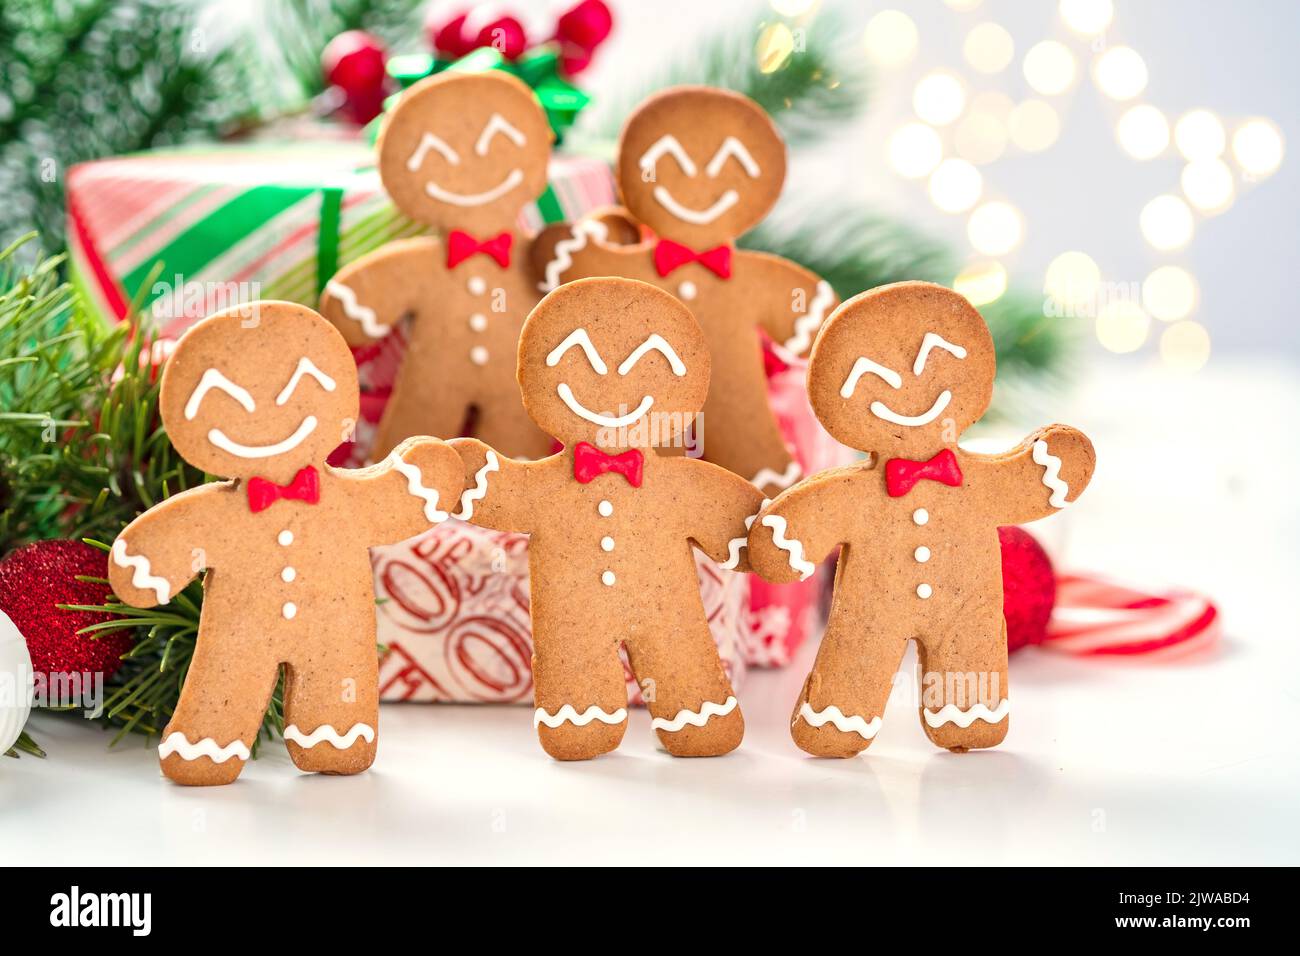 Christmas Decorations with Gingerbread man and Gift Box Stock Photo